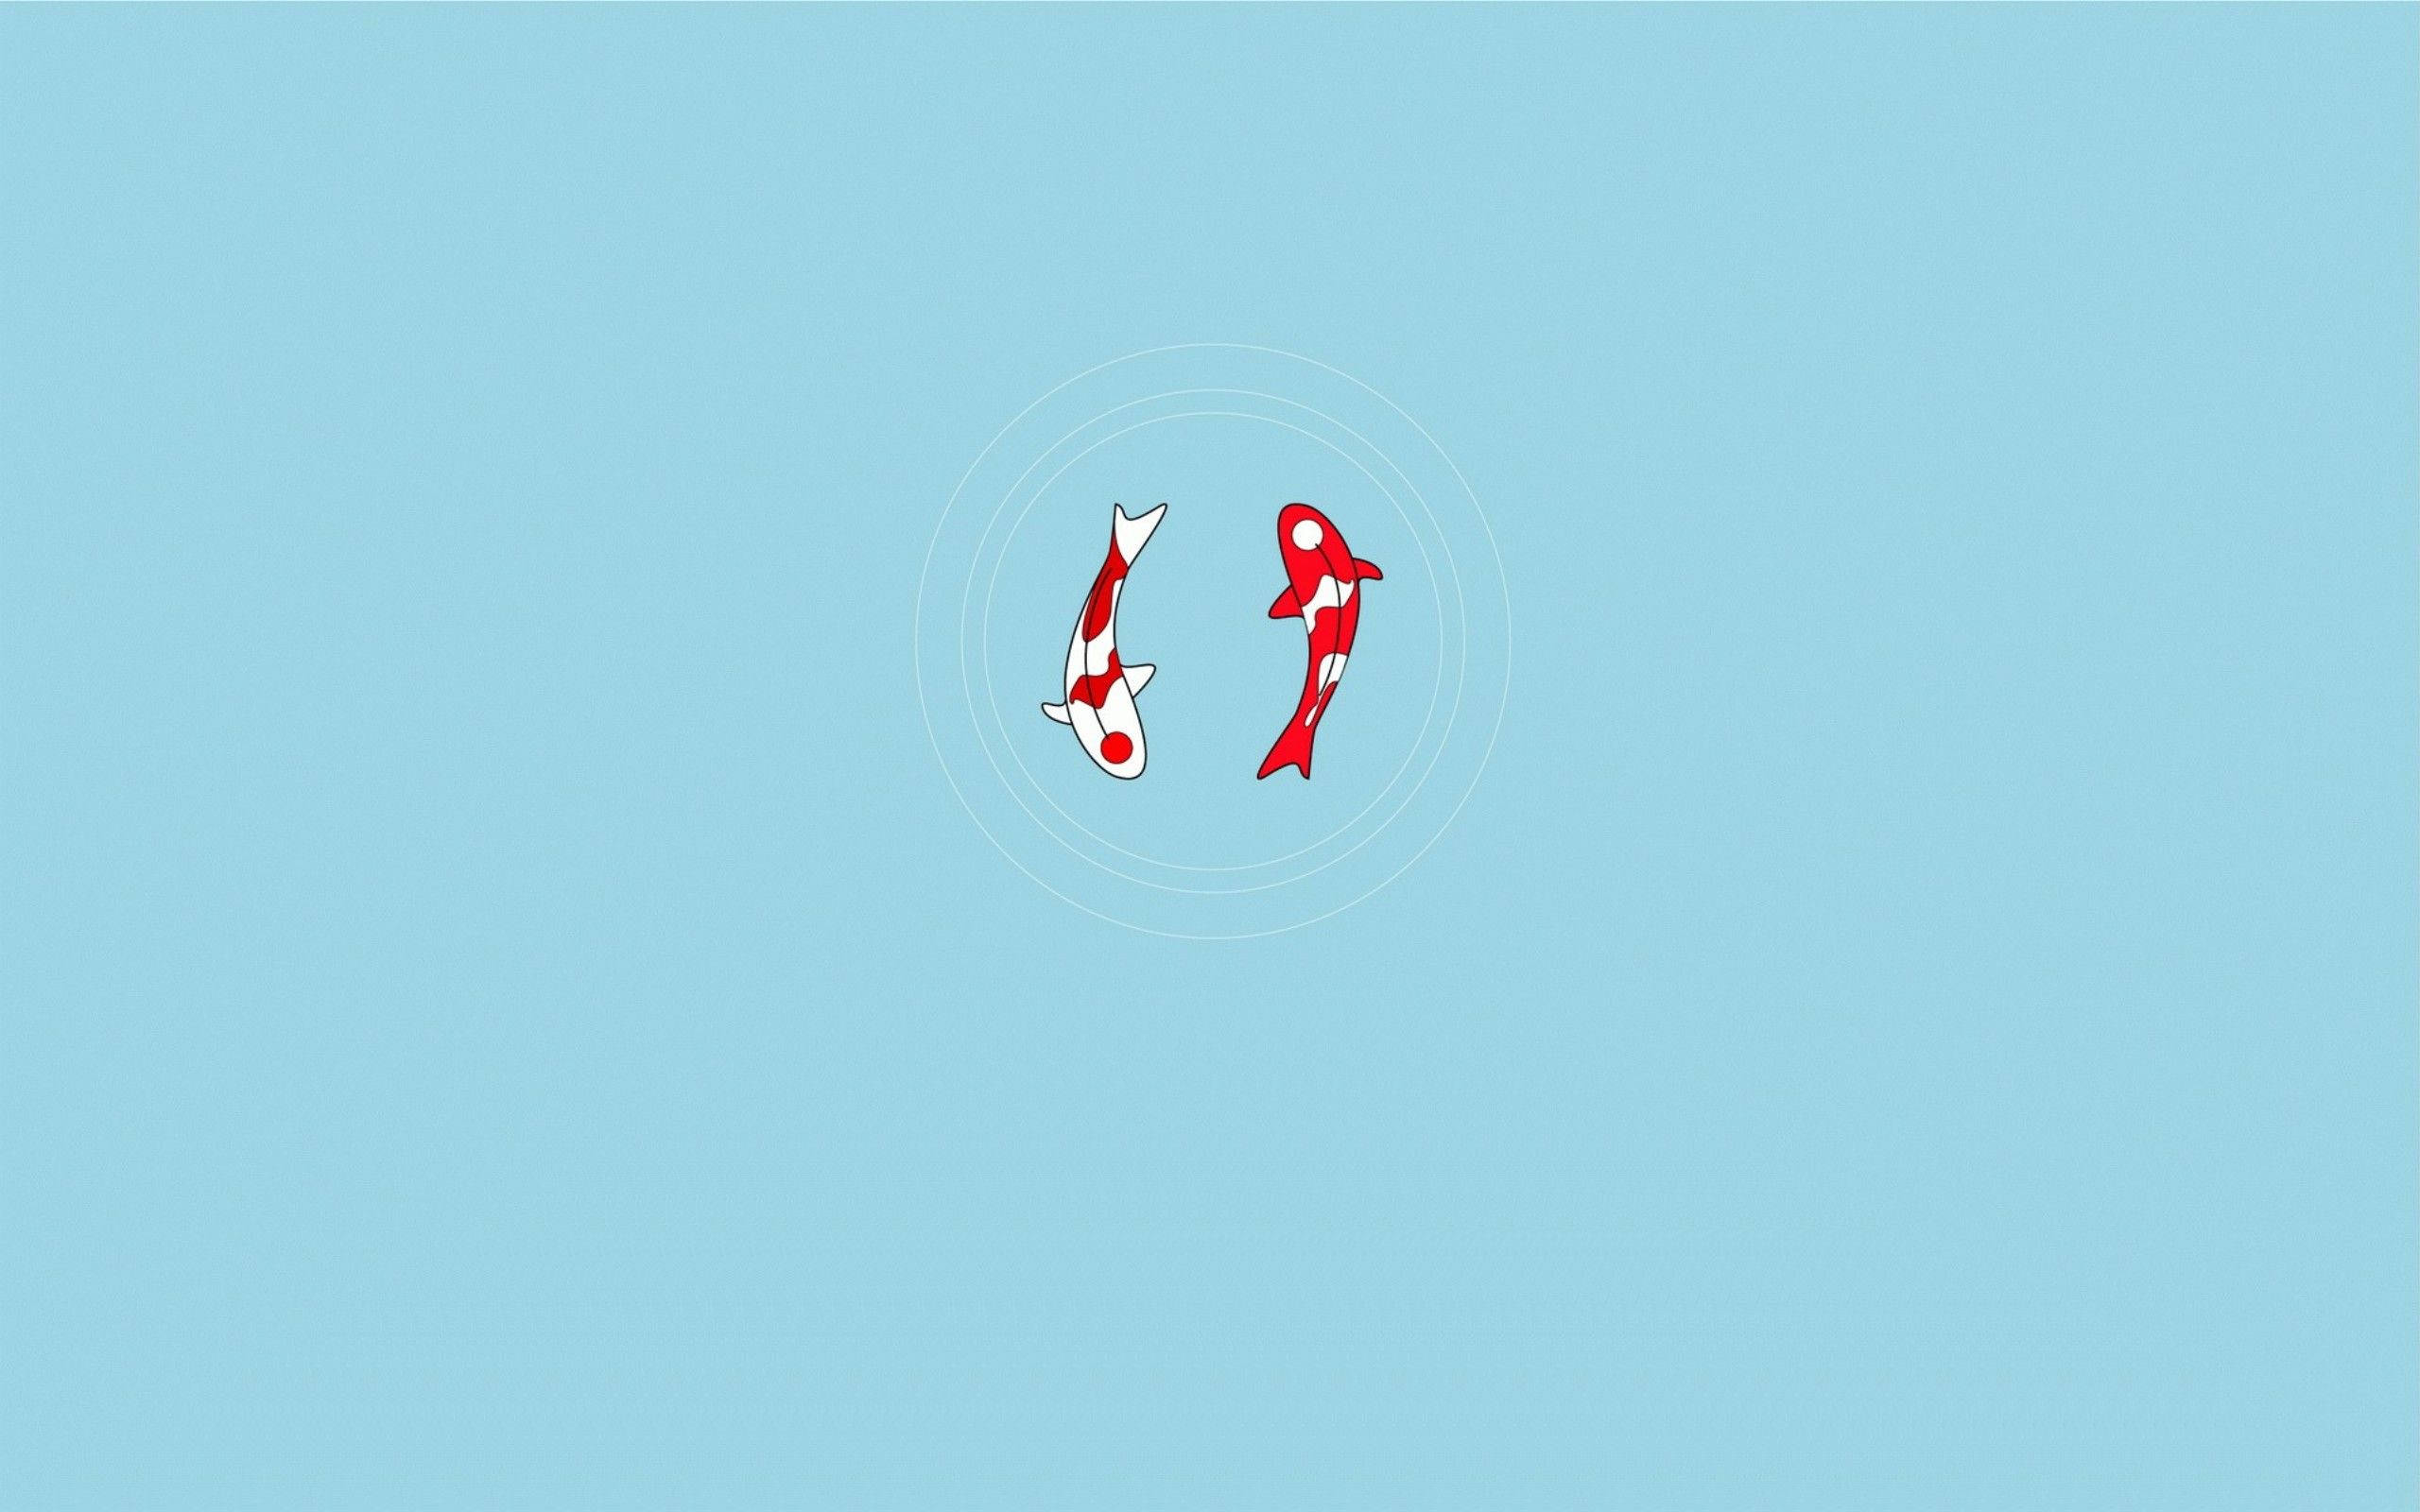 Minimalistic wallpaper with two koi fish in the middle - Clean